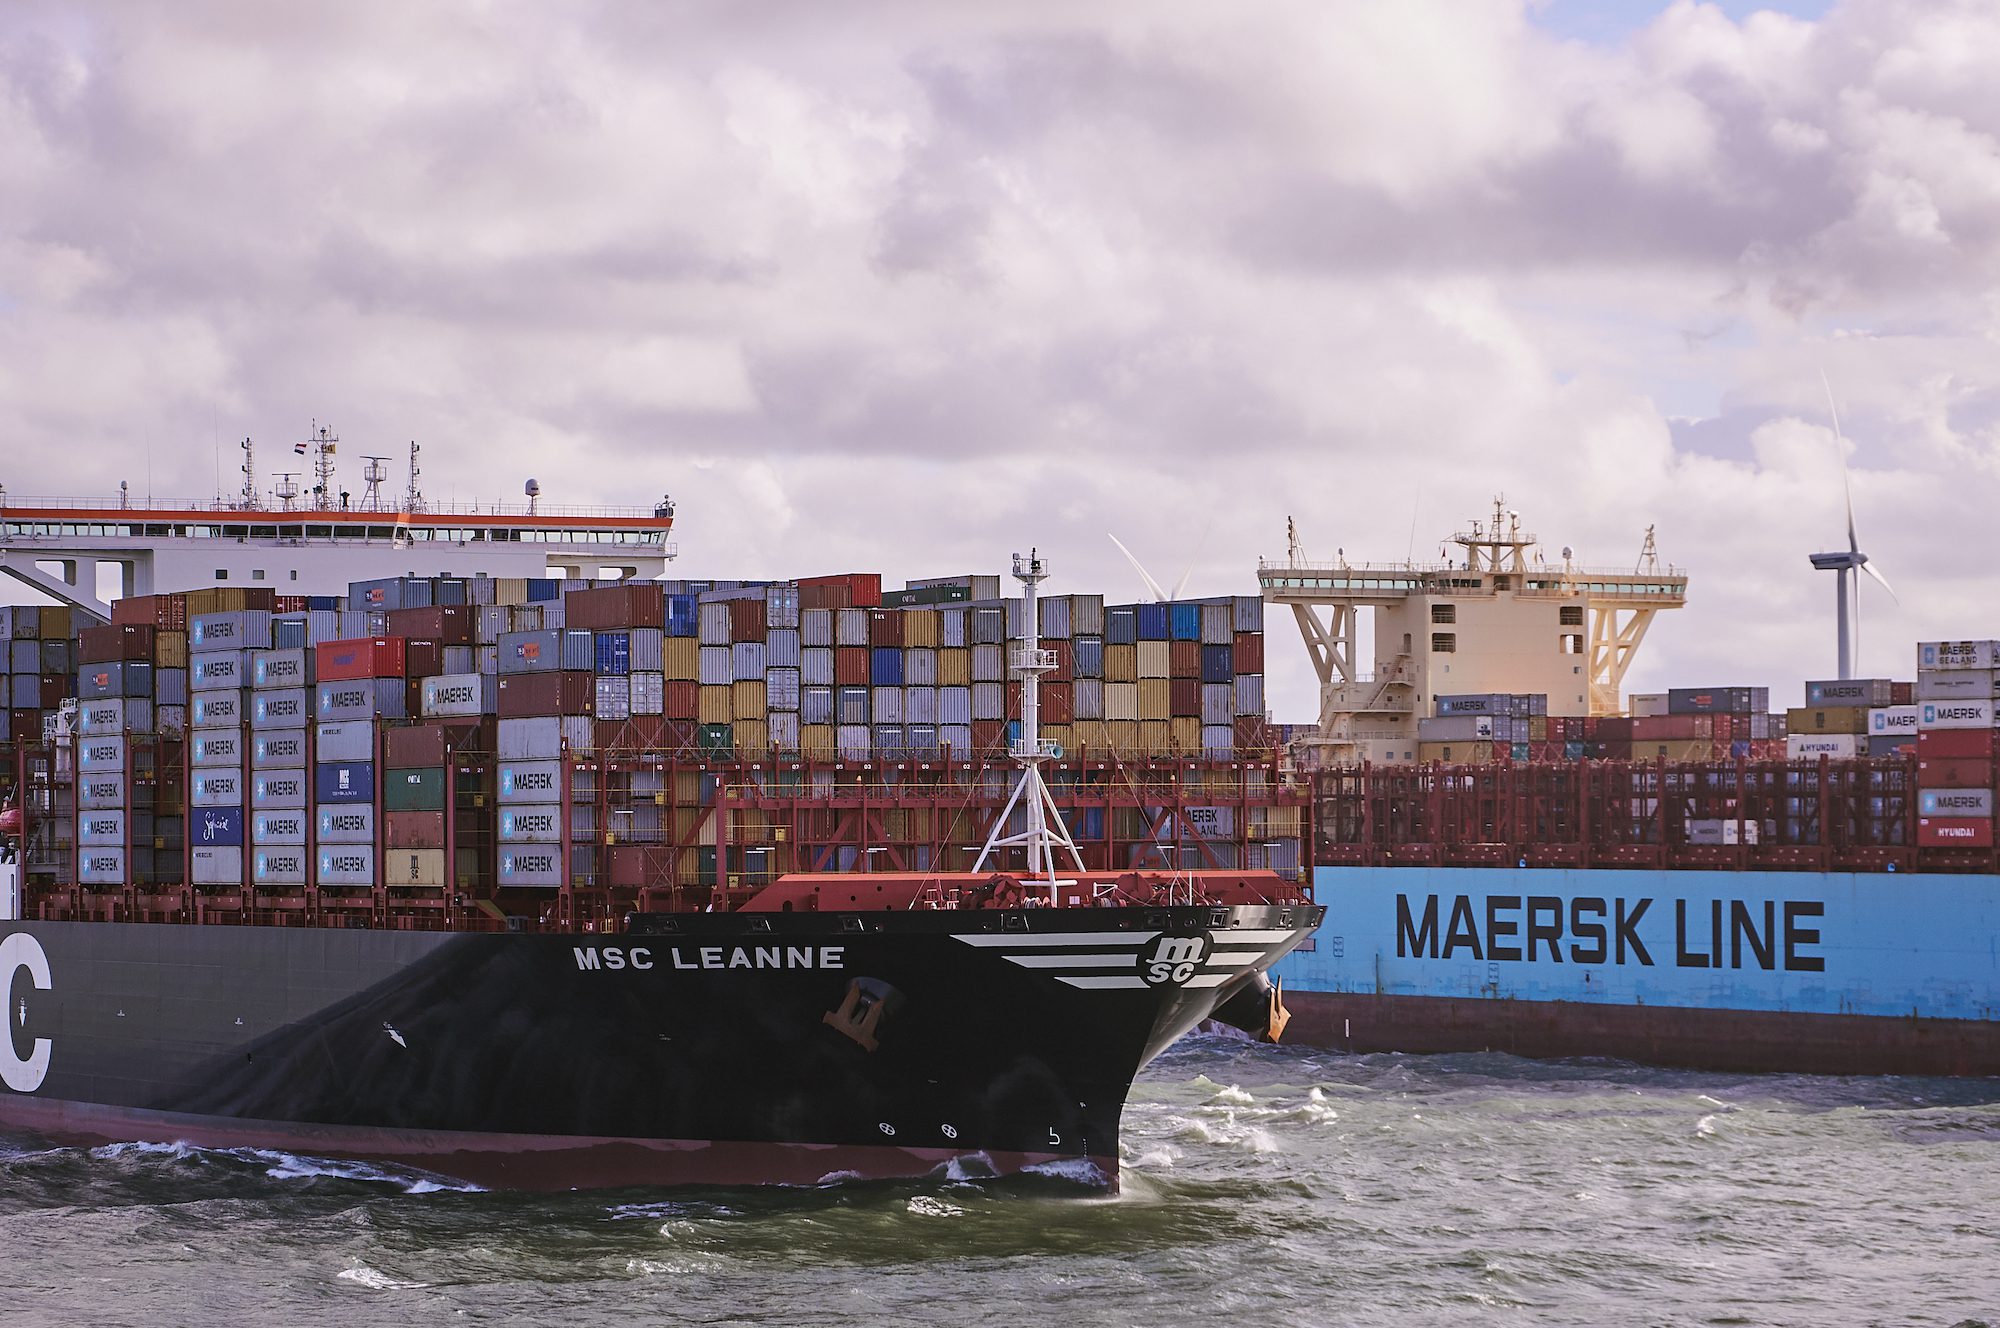 An MSC containership passes a Maersk containership